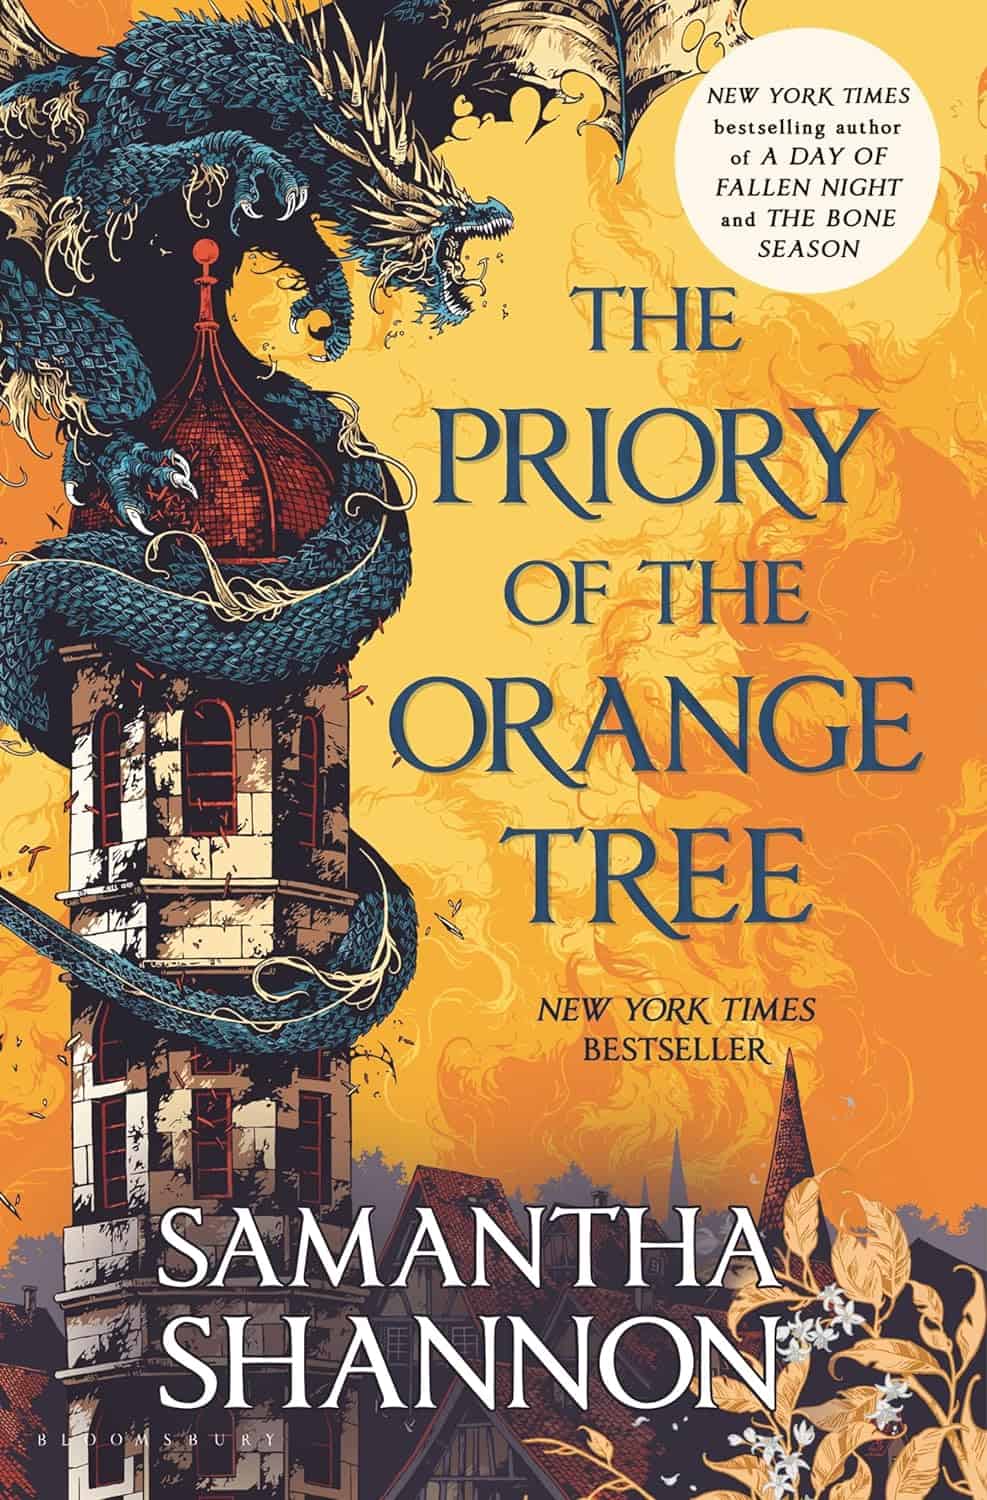 The Priory of the Orange Tree, by Samantha Shannon